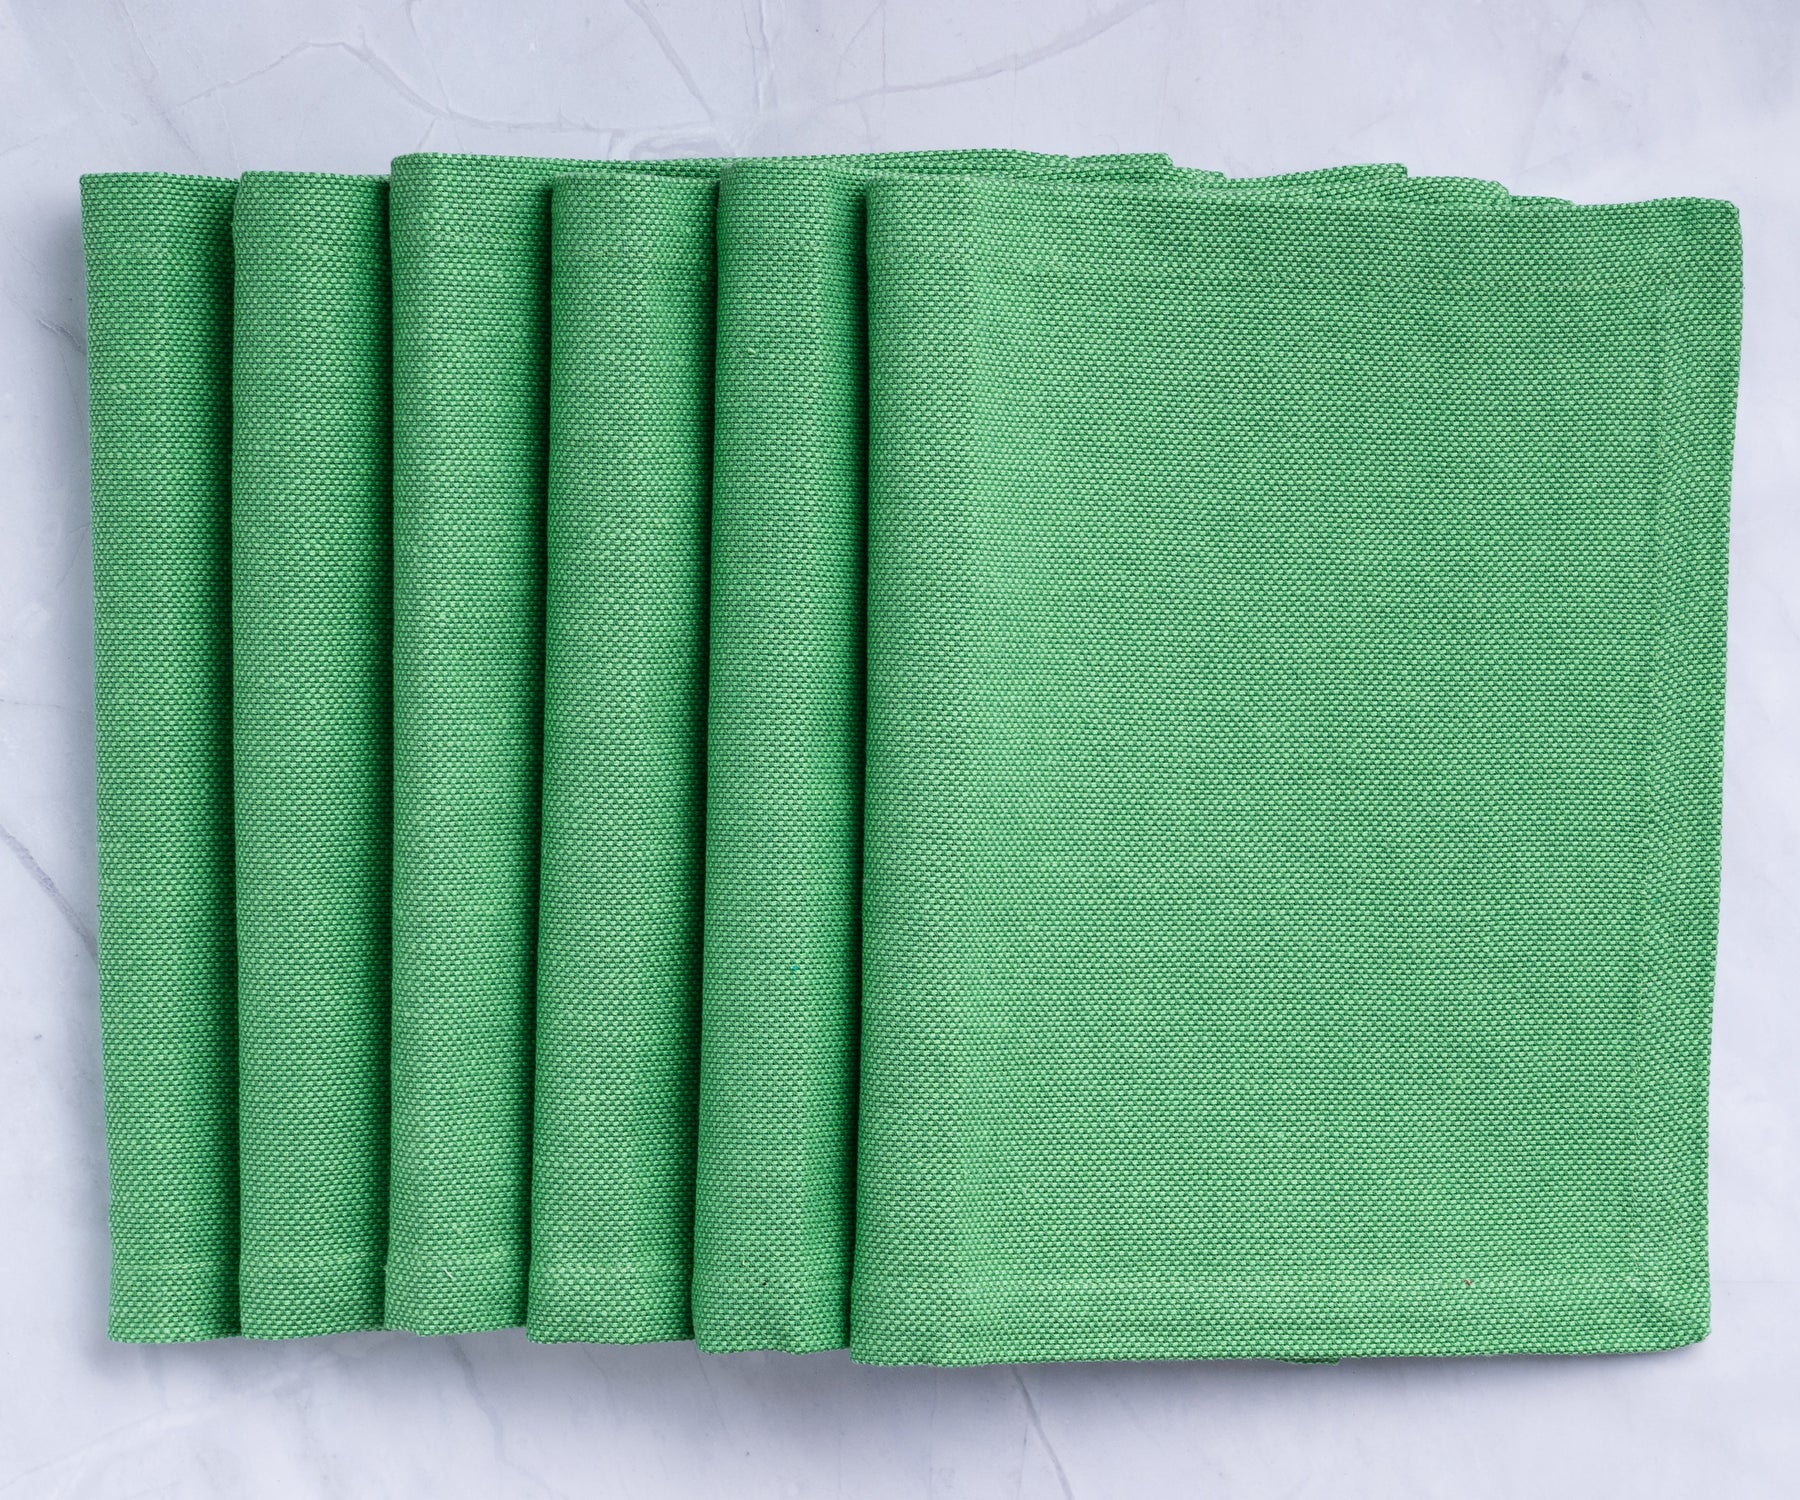 Revamp your table with green fabric placemats, adding charm and protection for a delightful dining experience. Elevate your meals today!